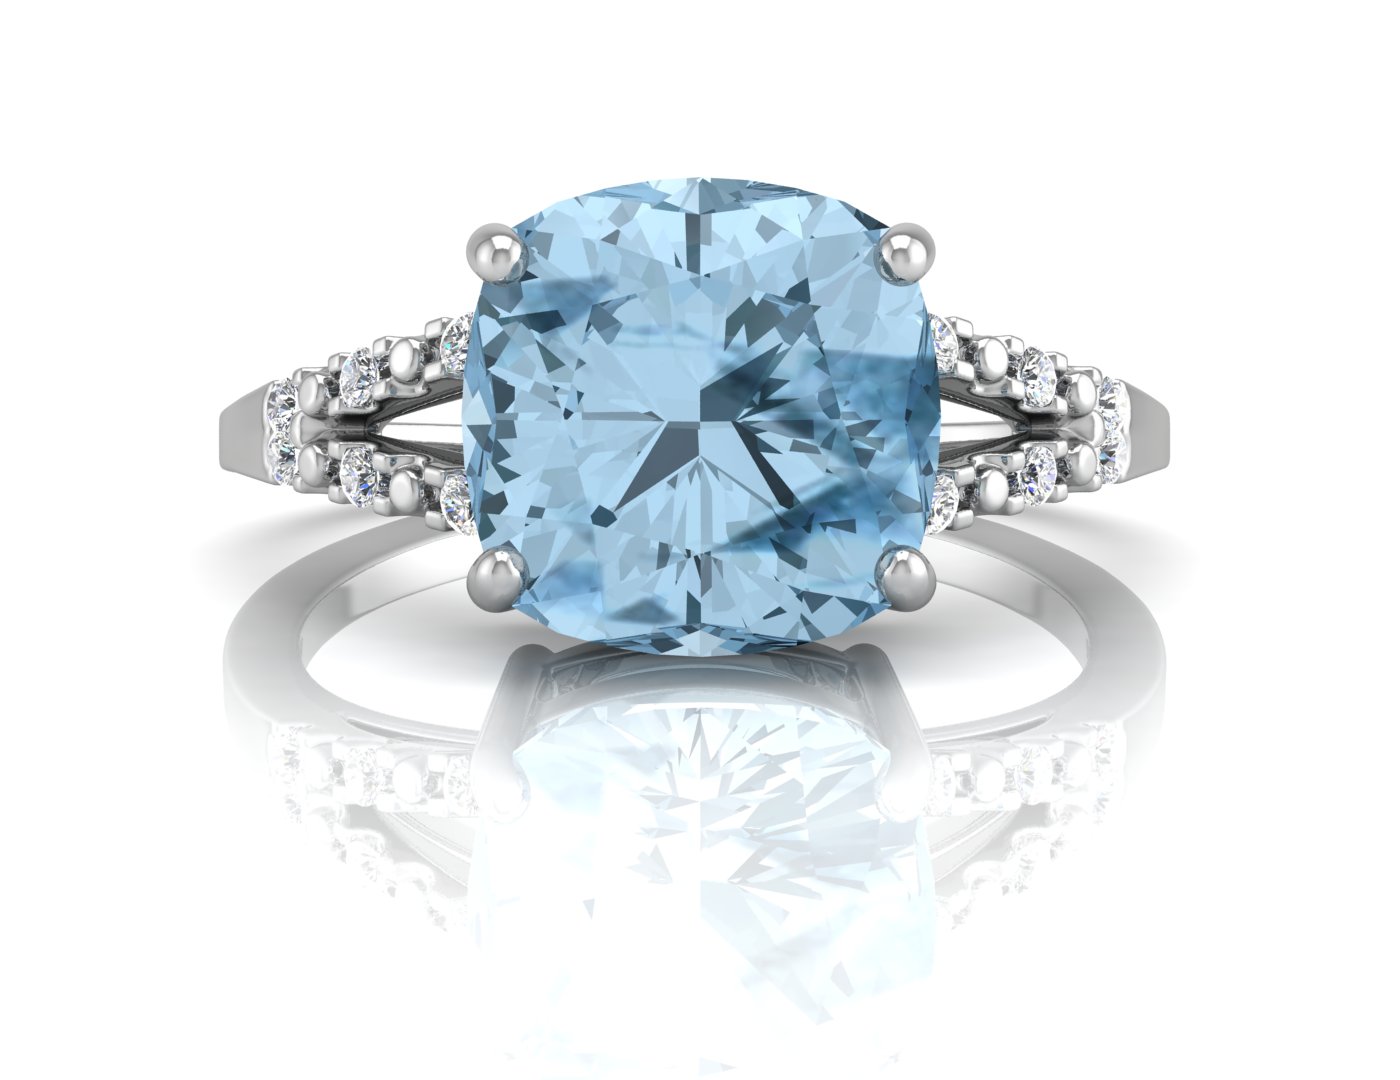 9ct White Gold Cushion Cut Blue Topaz With Diamond Set Shoulders Ring - Image 4 of 5